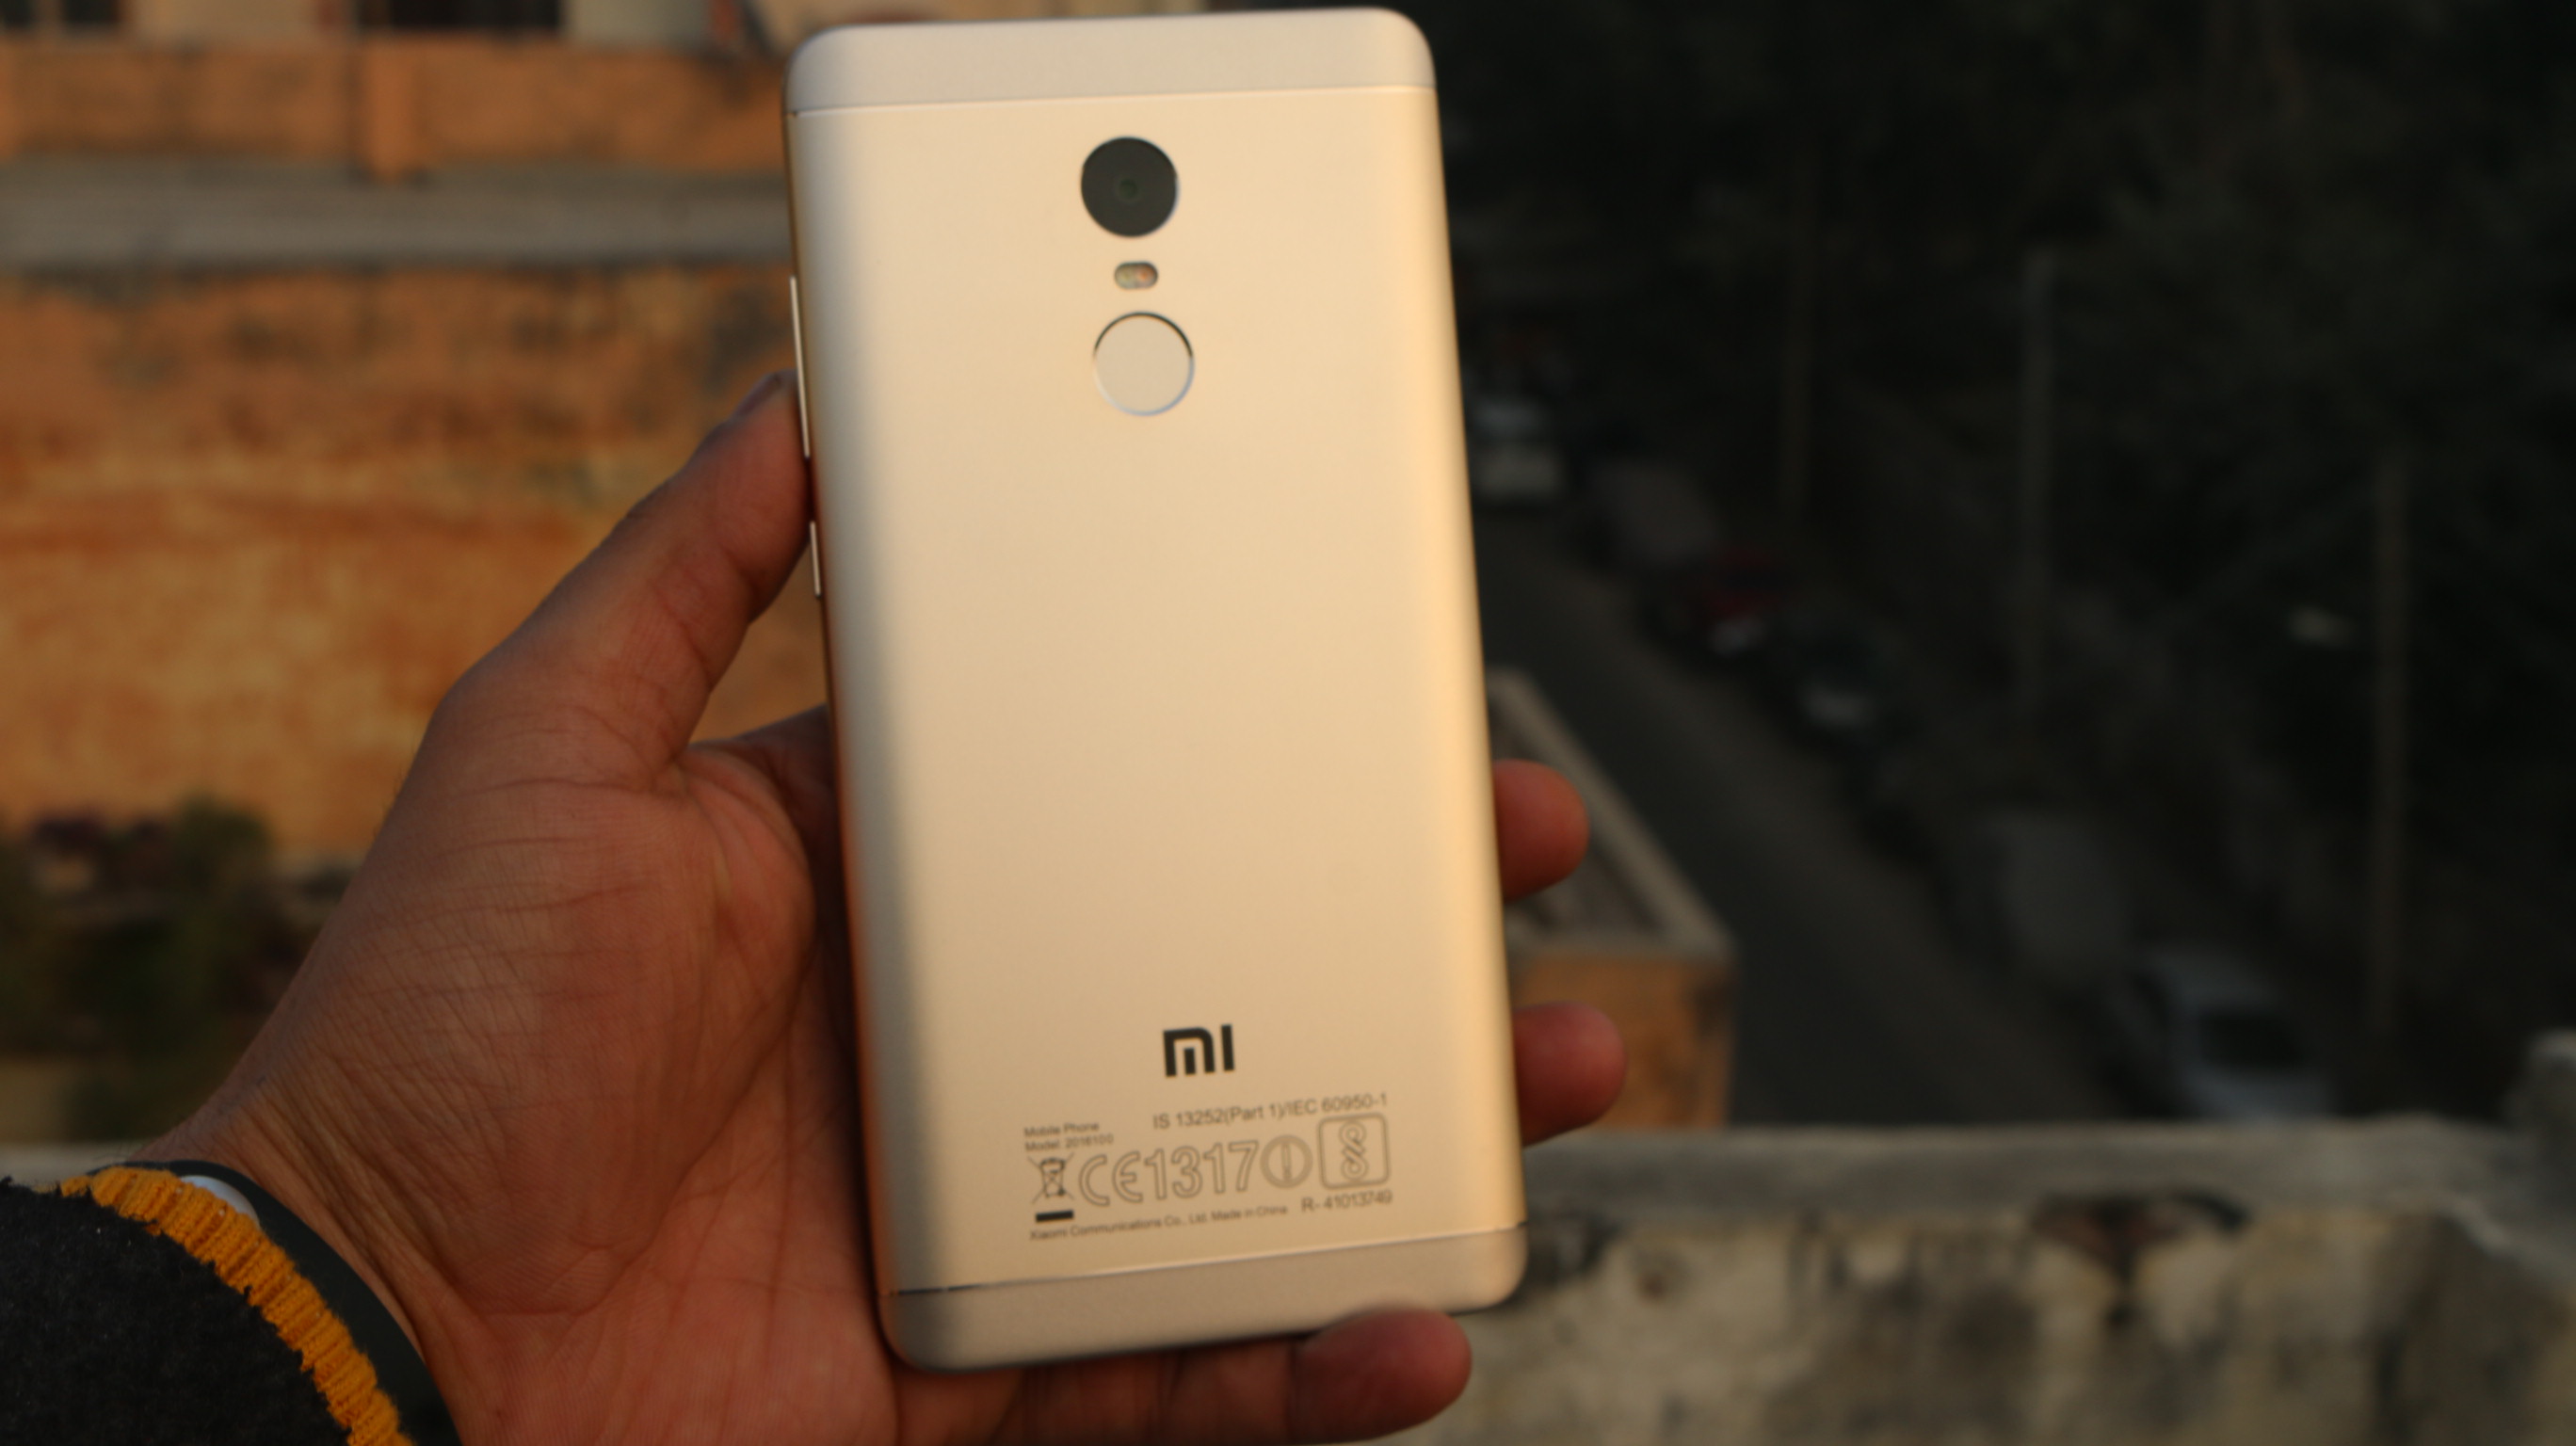 Xiaomi redmi note 4gb. Xiaomi Redmi Note 4 3/64gb. Xiaomi Redmi Note 4 4/64gb. Xiaomi Redmi Note 4 Gold. Xiaomi Redmi Note 4 2.